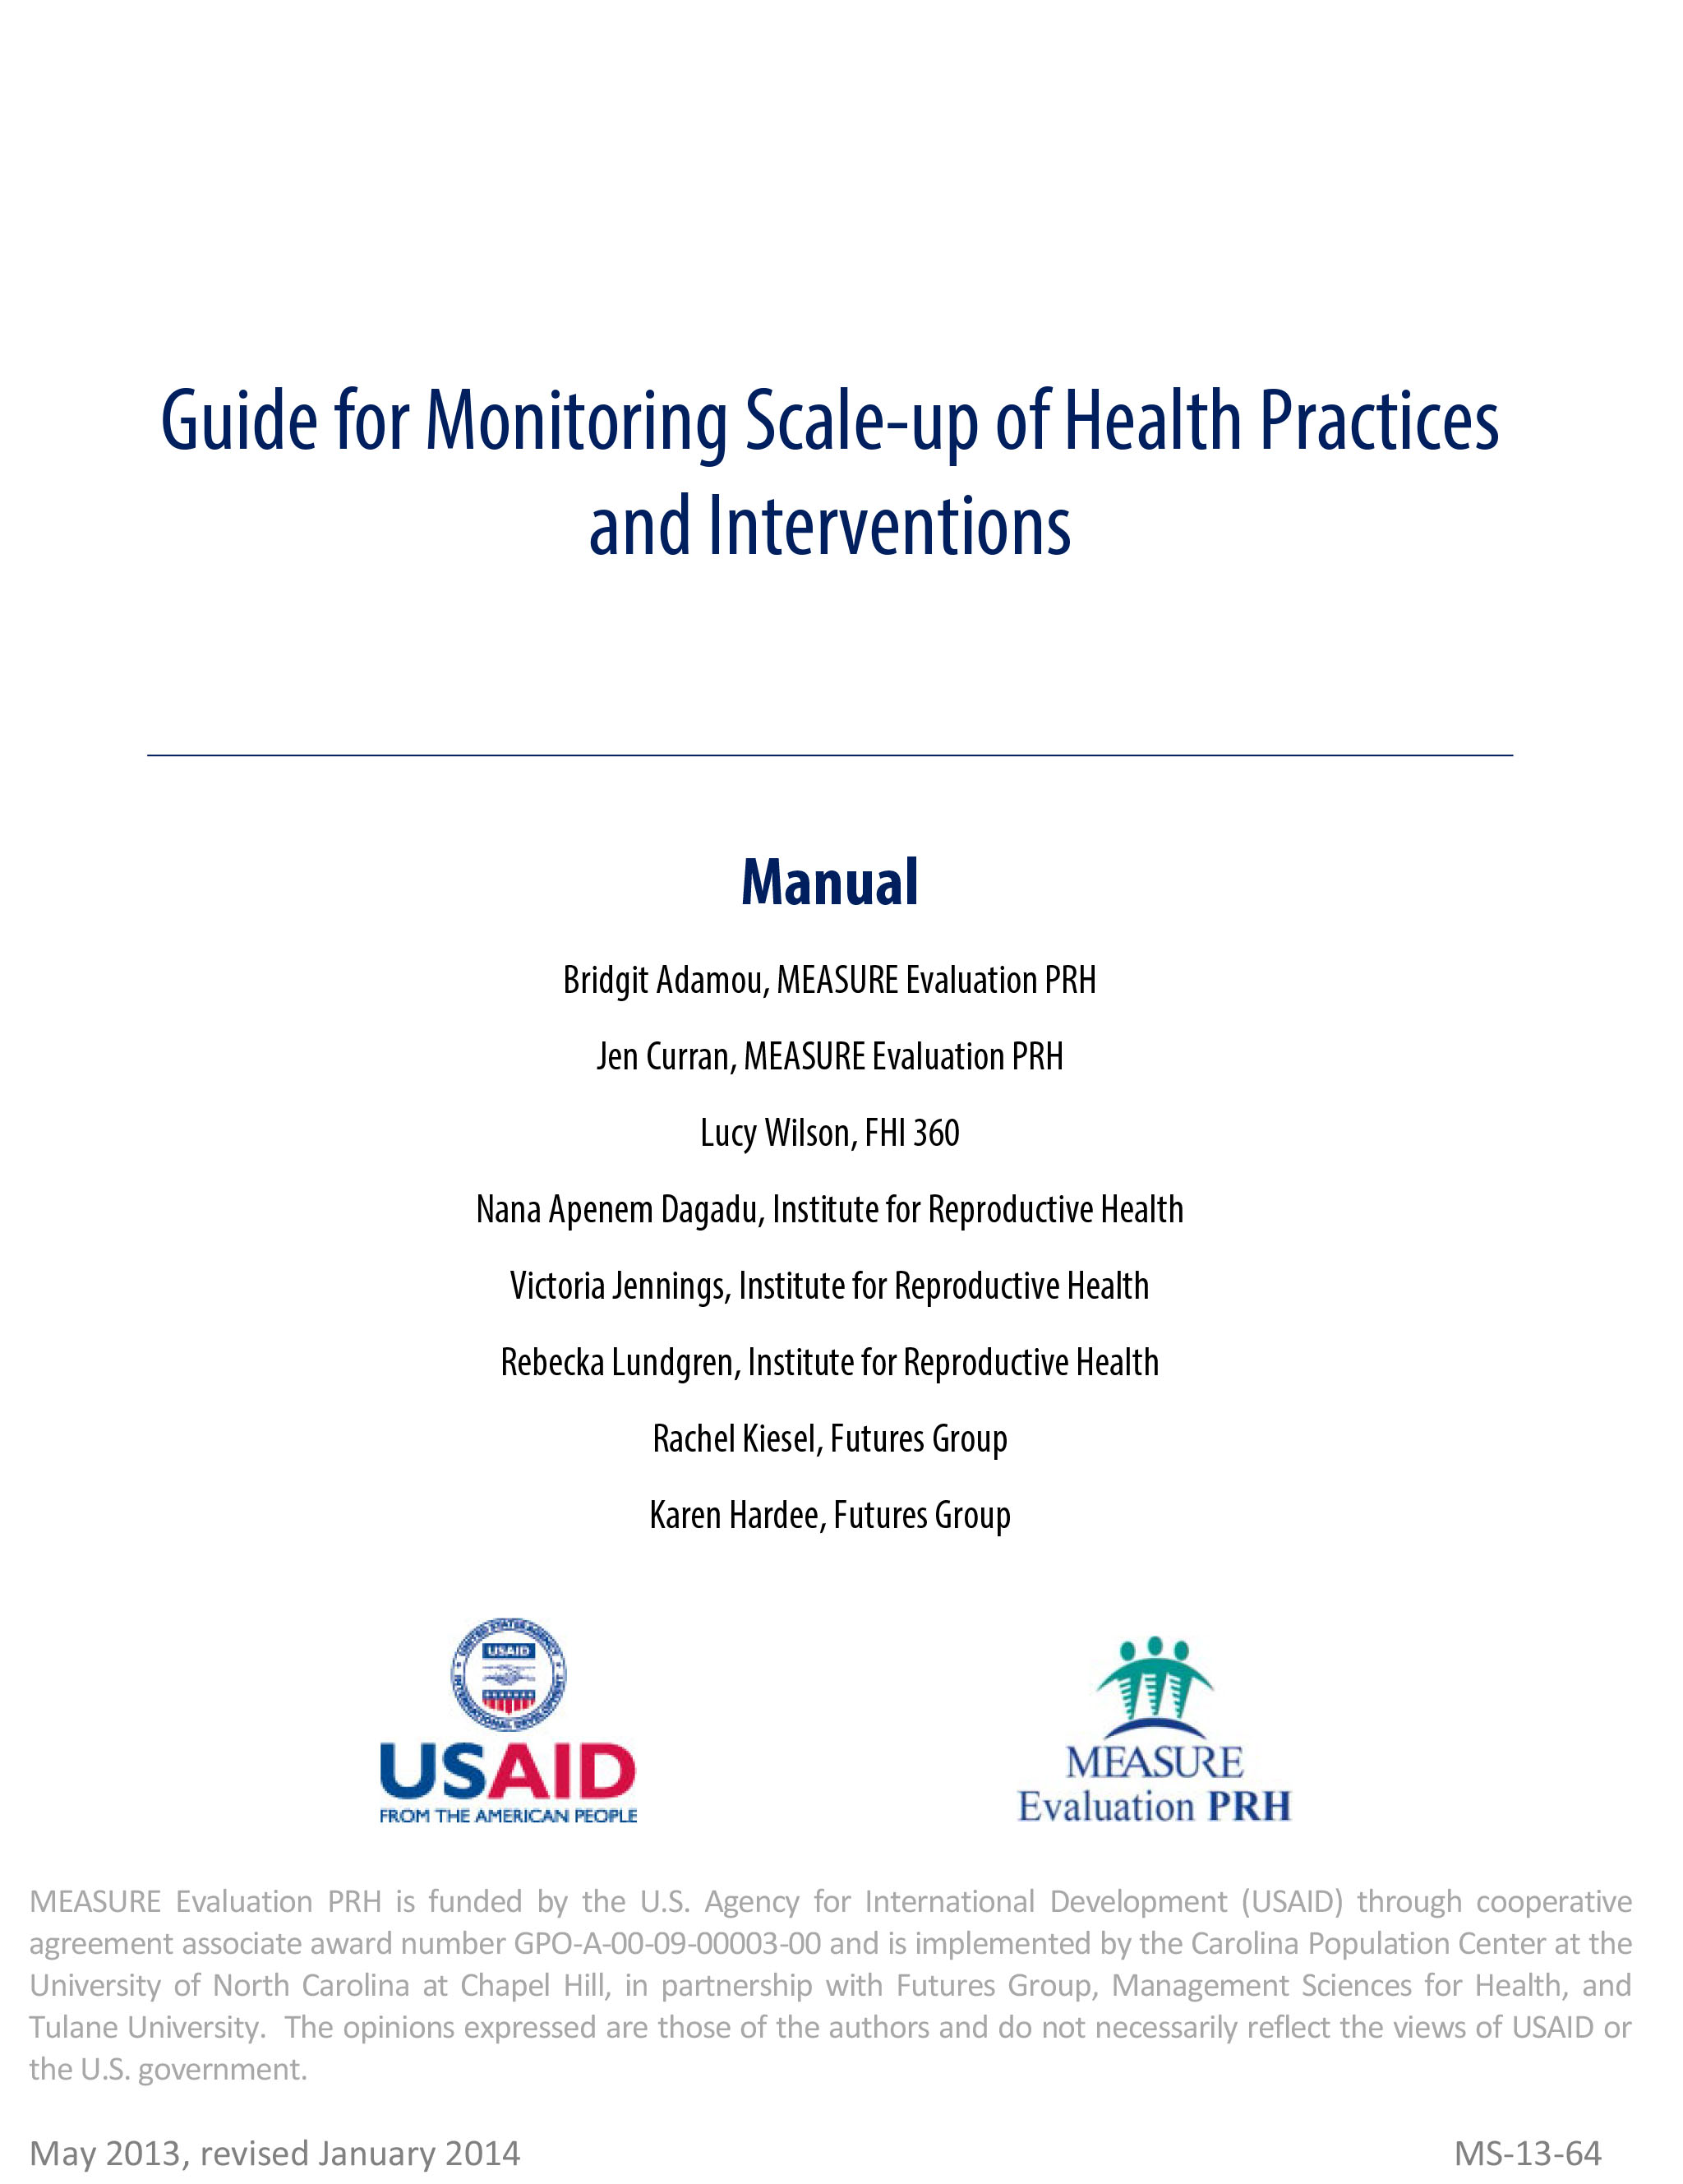 Selected Frameworks and Approaches for Scaling Up Health Interventions: Appendix B to Guide for Monitoring Scale-up of Health Practices and Interventions